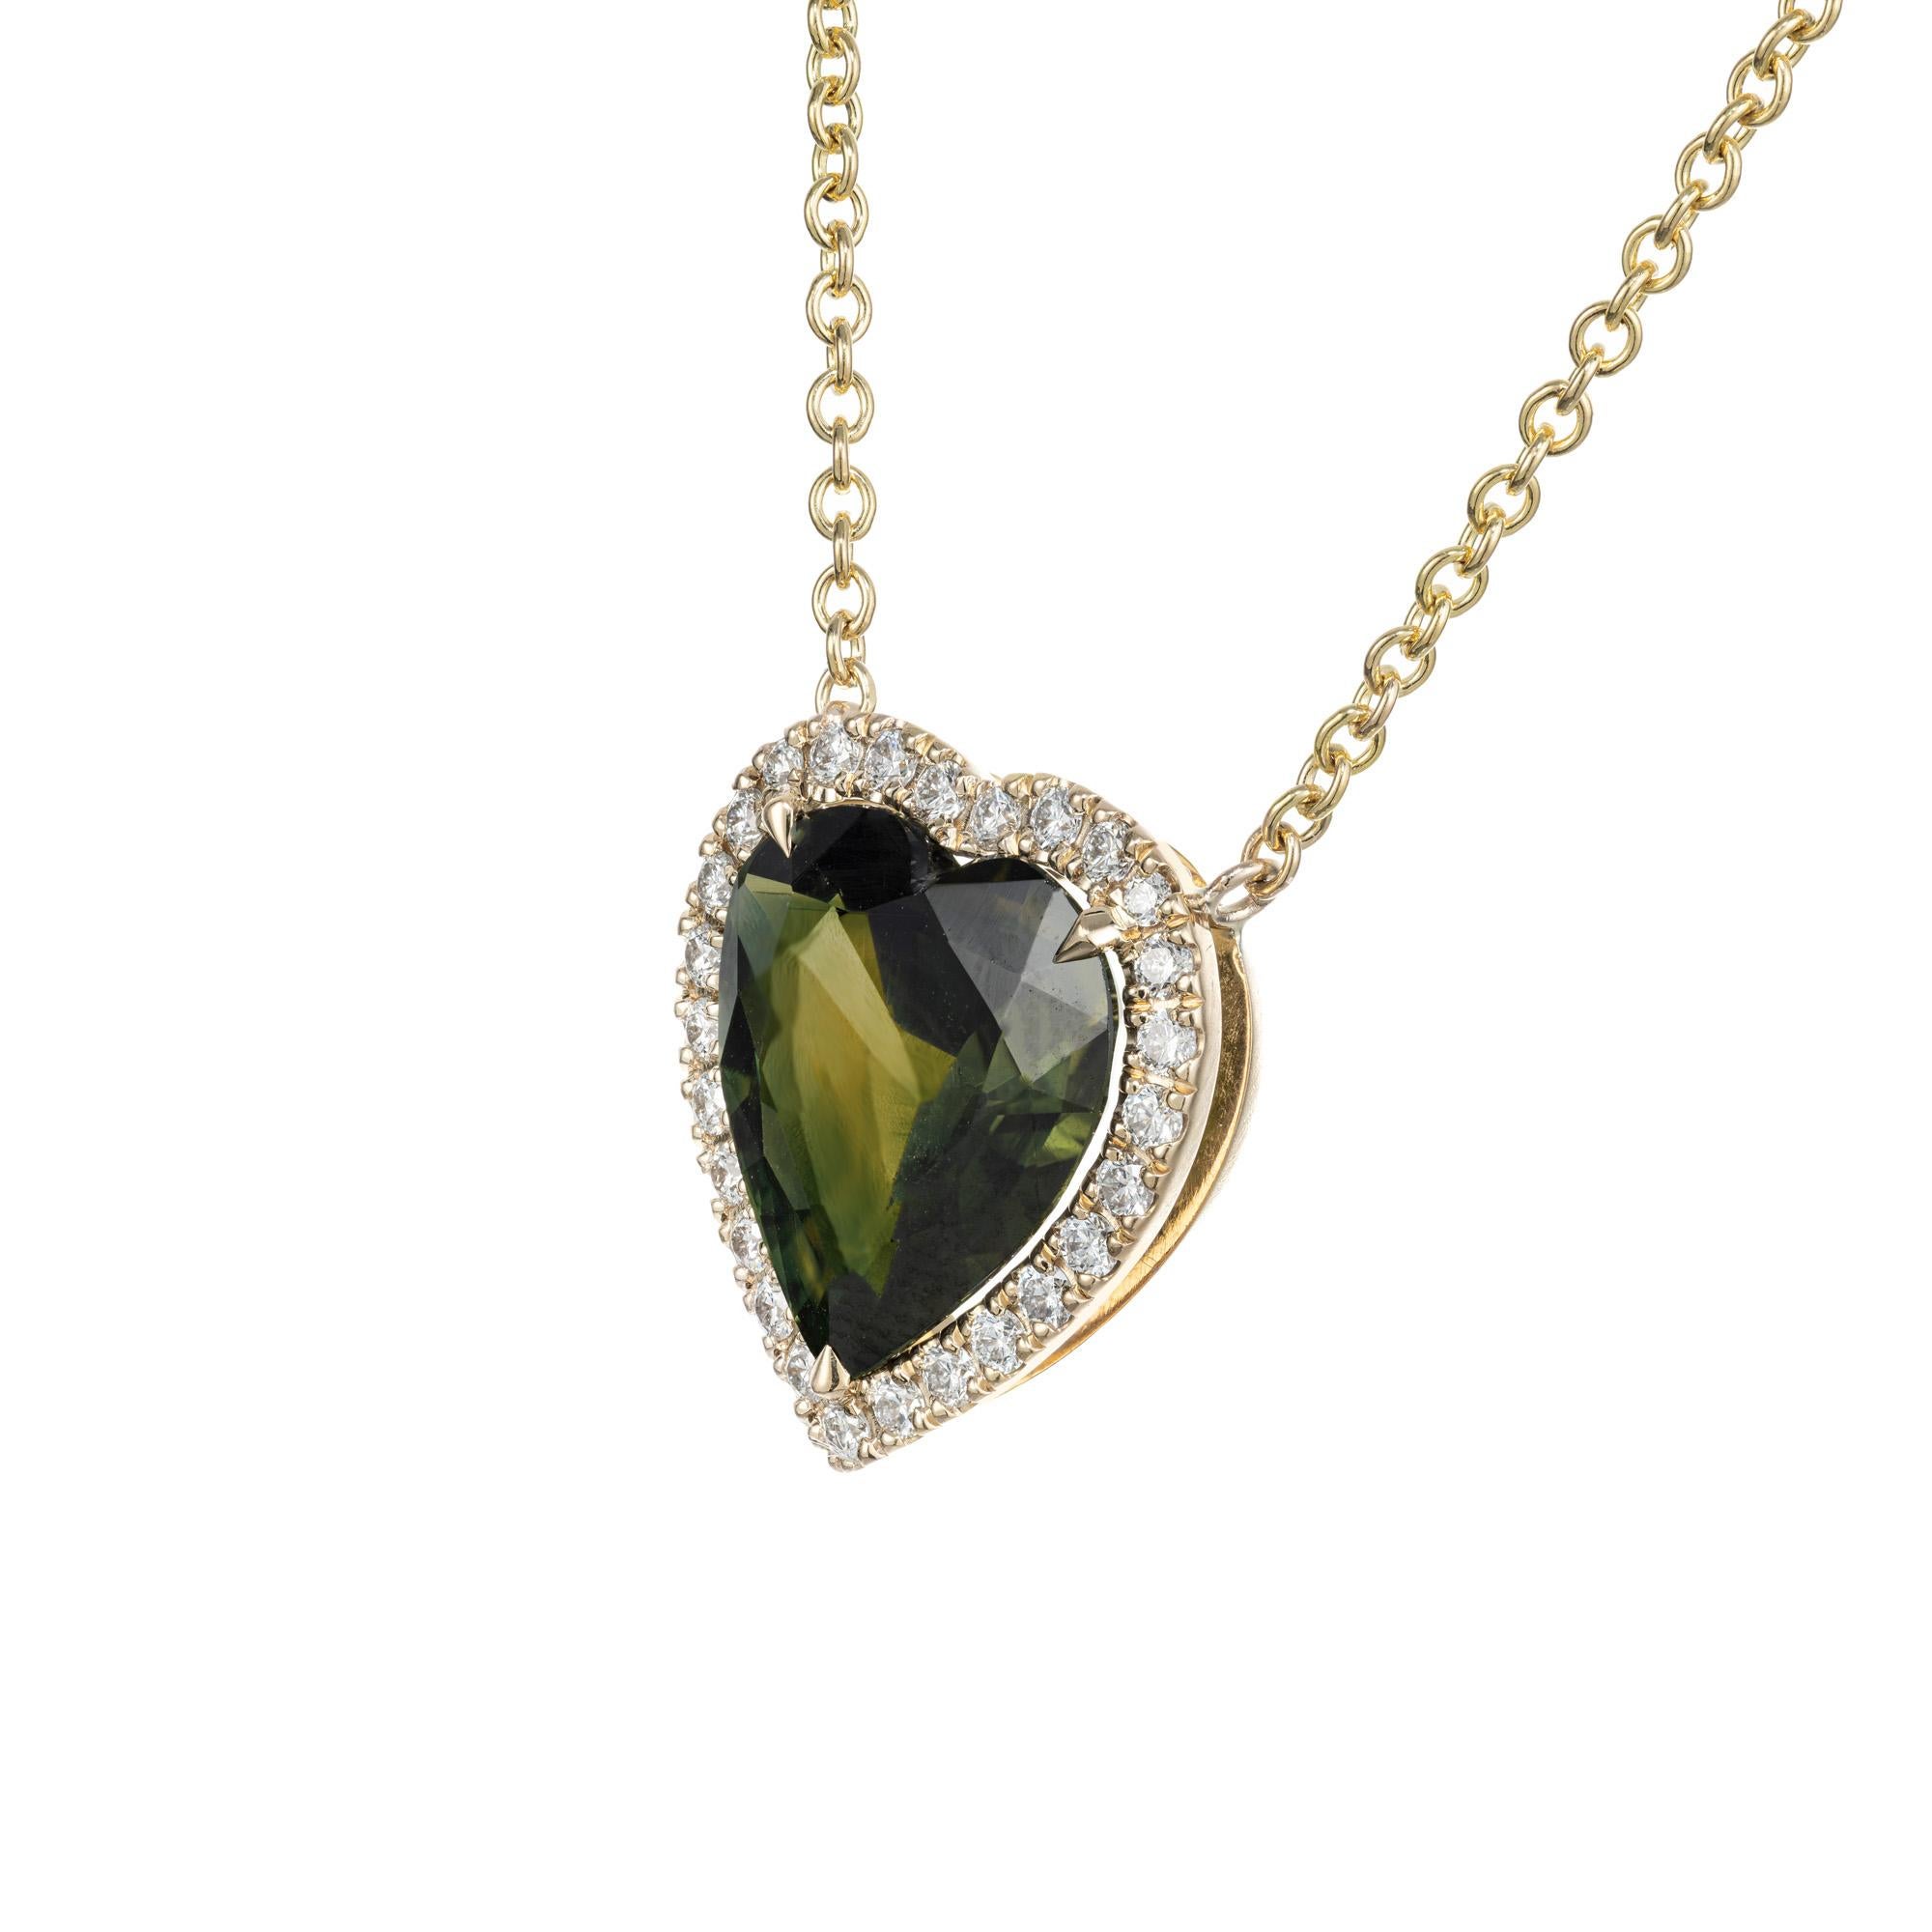 Sapphire and diamond pendant necklace. 4.98 Carat GIA certified heart shaped green sapphire with a halo of 27 round brilliant cut diamonds. 18k yellow gold setting with an 18 inch chain. Designed and crafted in the Peter Suchy workshop.

1 heart